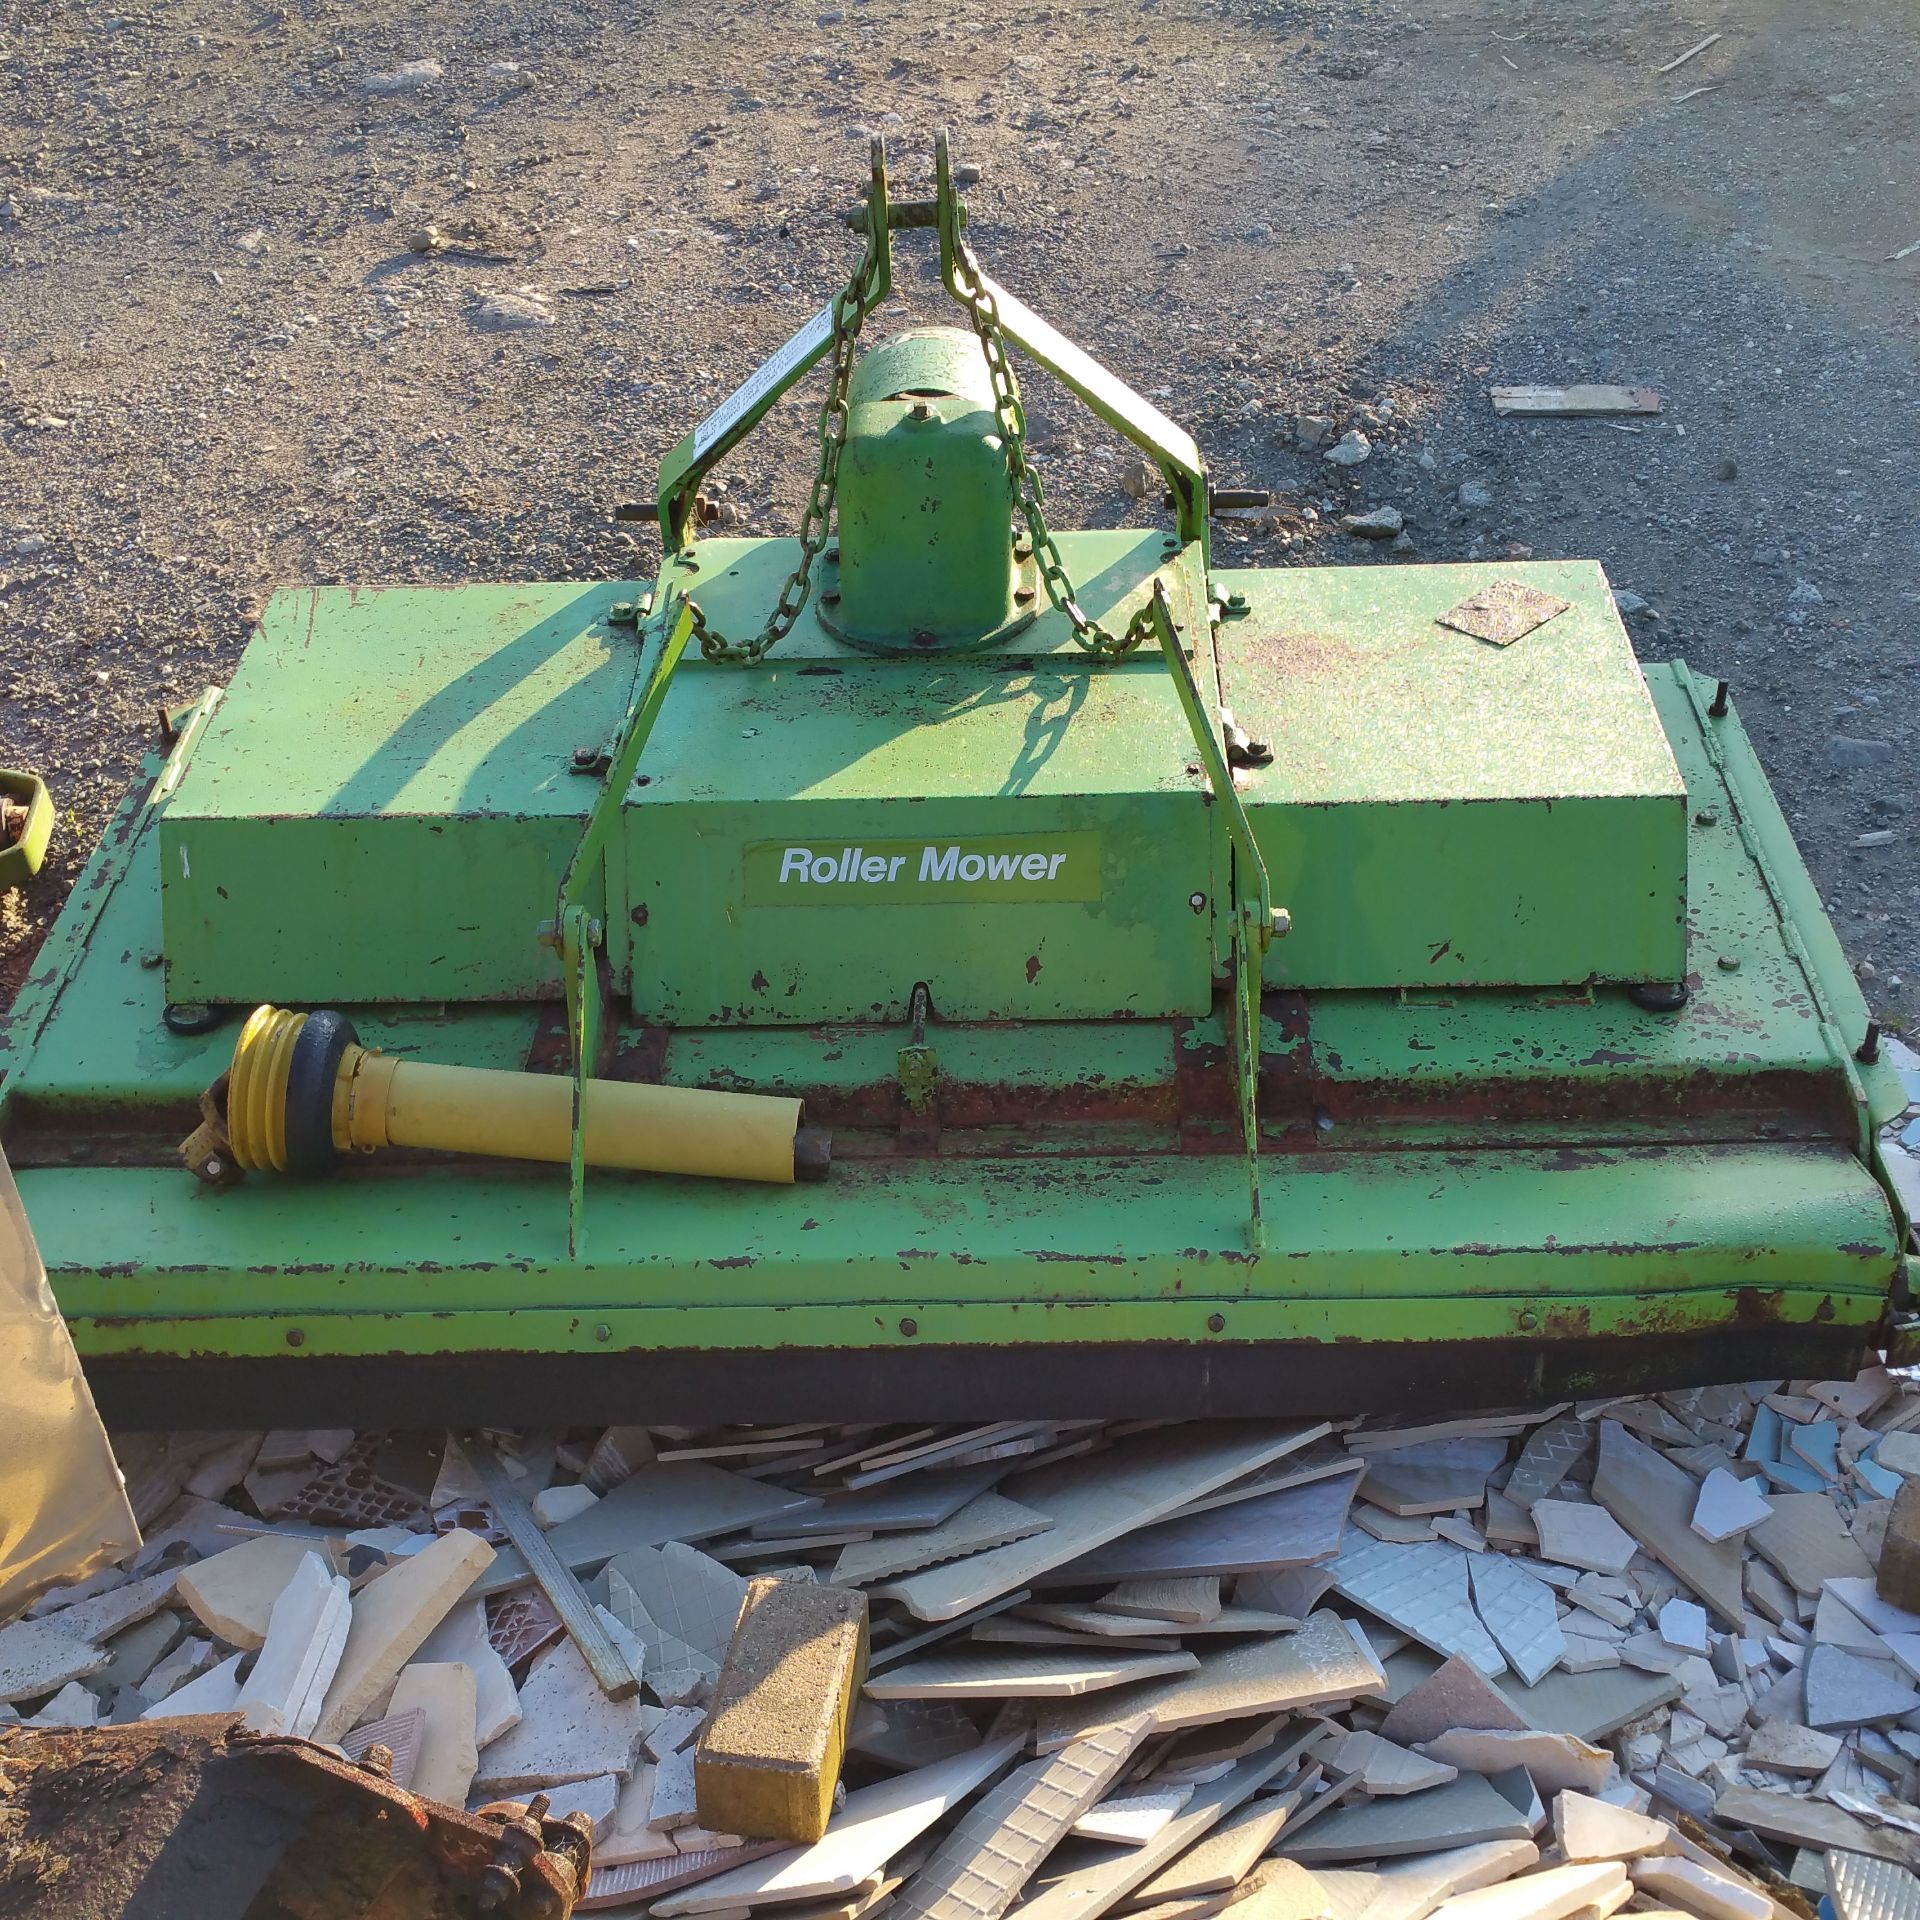 Dowdeswell 6' roller mower Front and rear rollers 6' cutting width Adjustable cutting height - Image 3 of 4